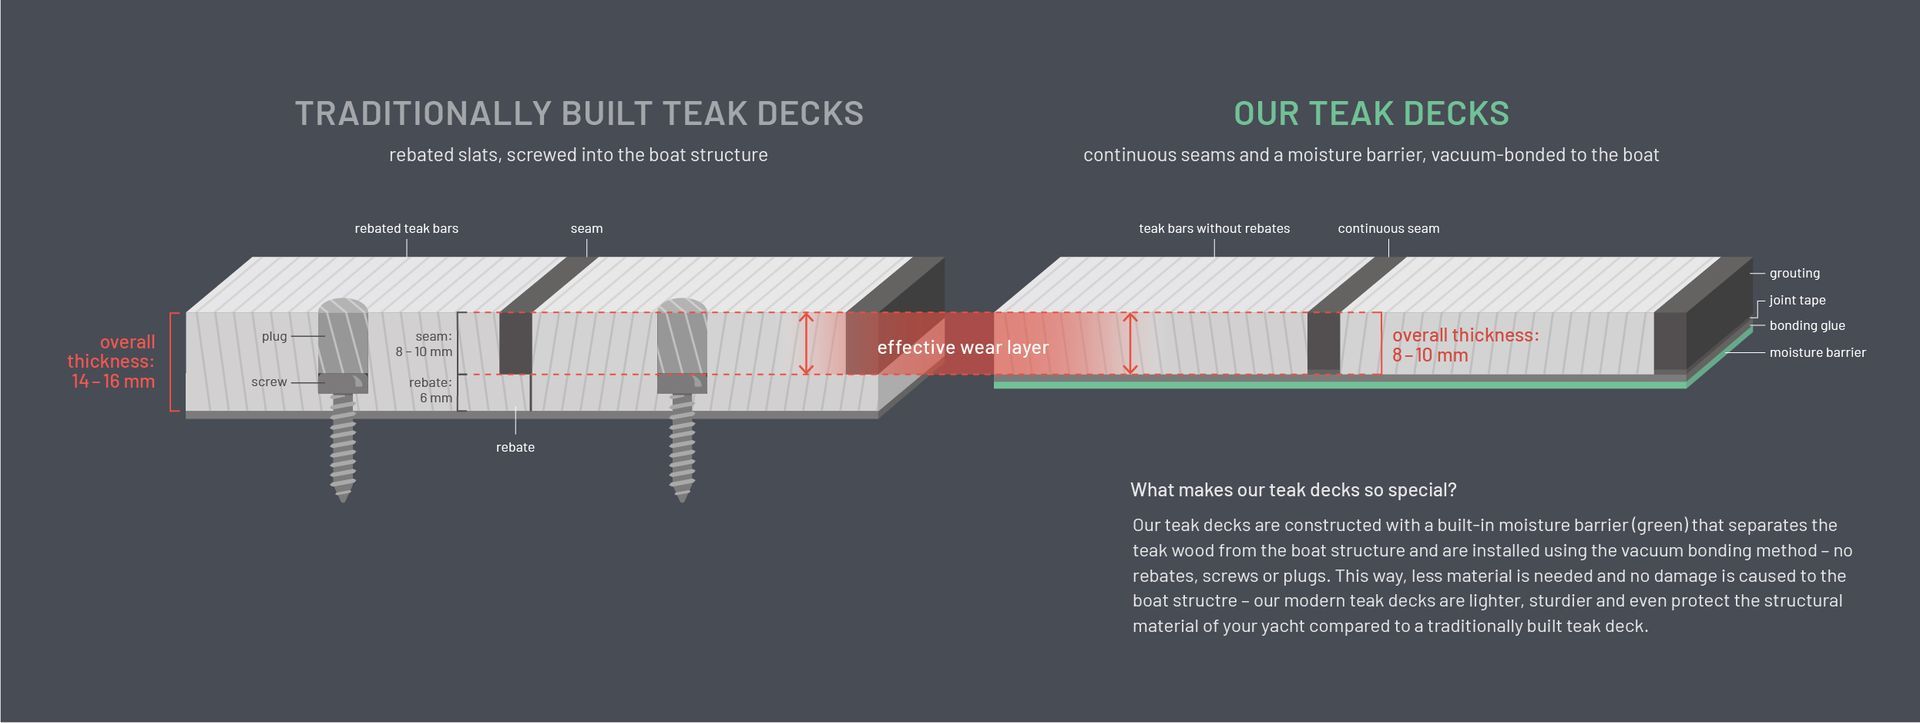 Thickness of a teakdeck with moisture barrier by MOBILERBOOTSBAU